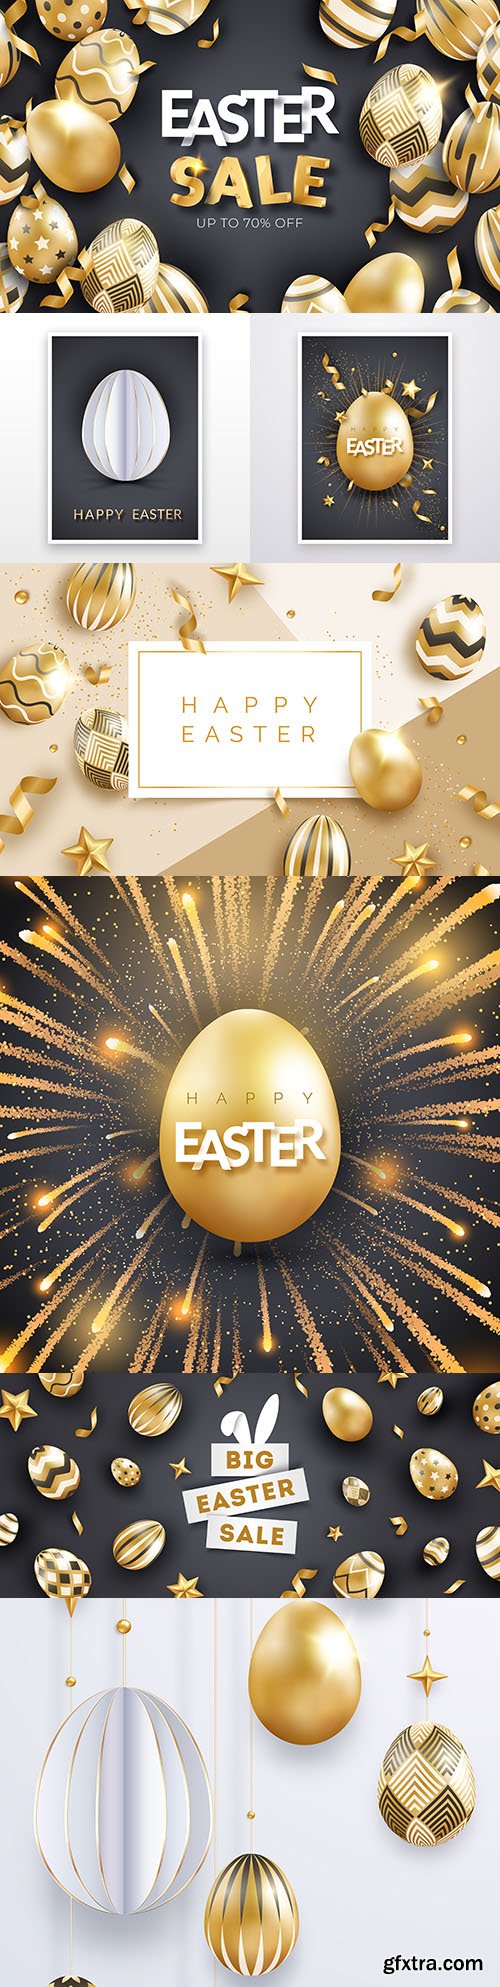 Easter postcard with realistic gold decorated eggs